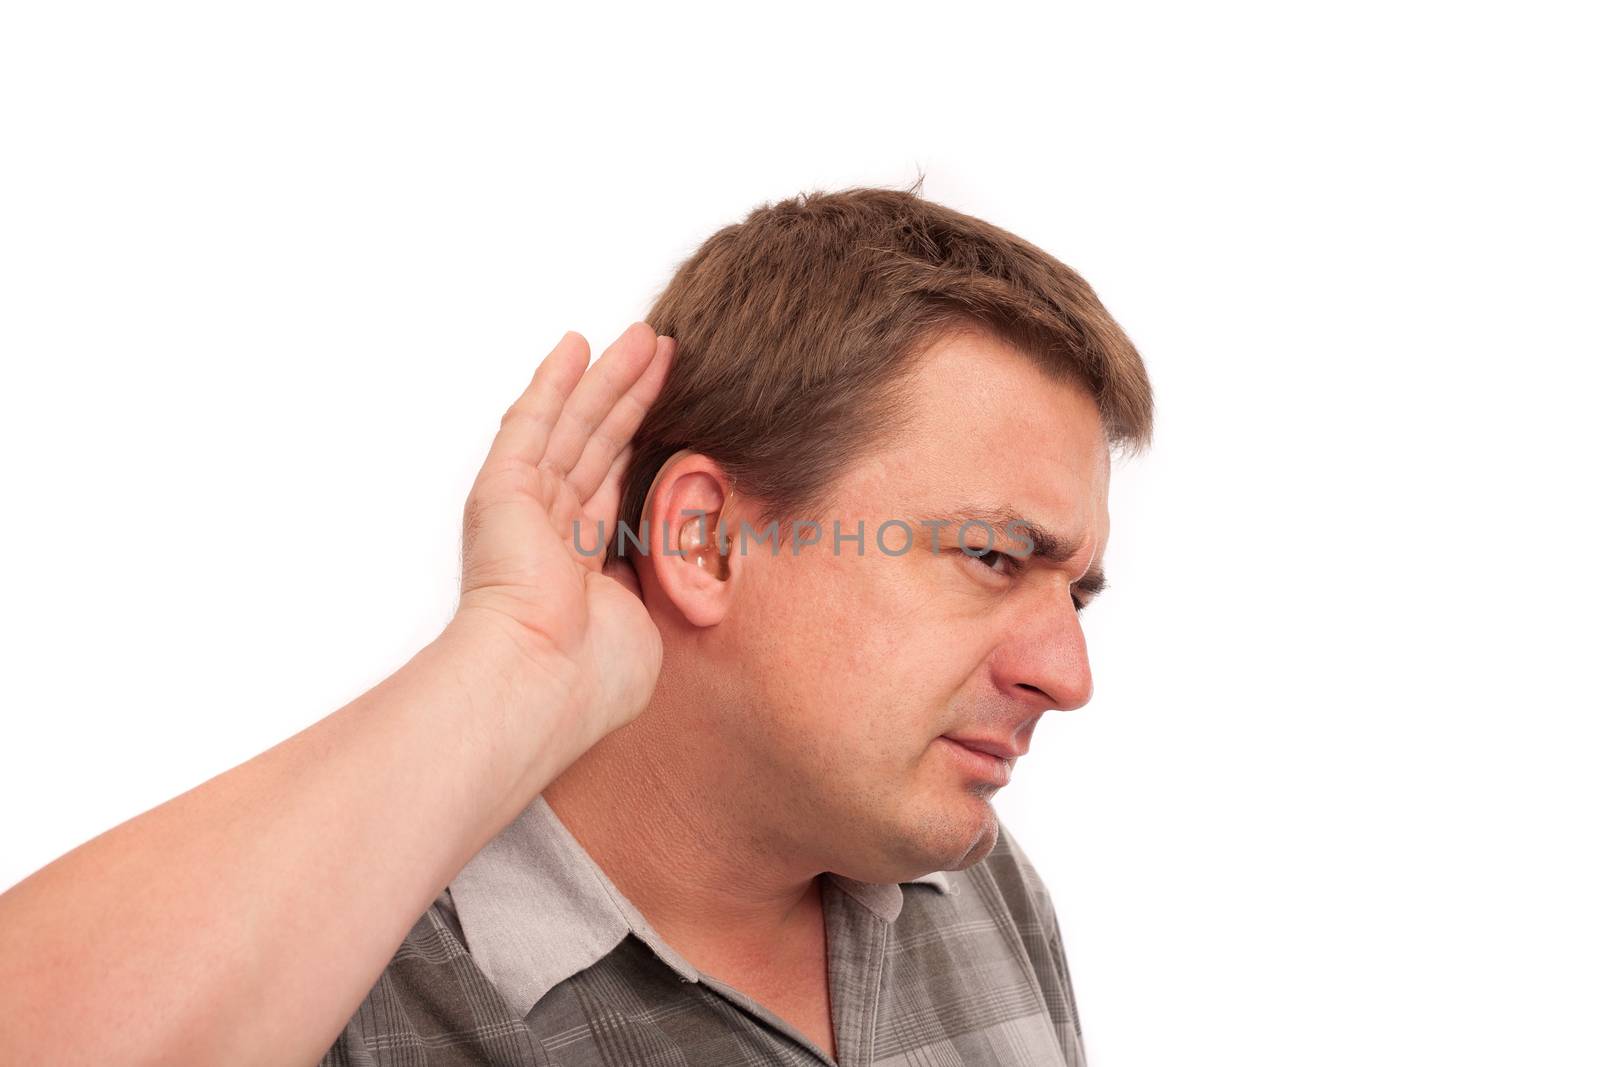 I can't hear you - Middle aged deaf man wearing hearing aids cupping hand behind ear on white background